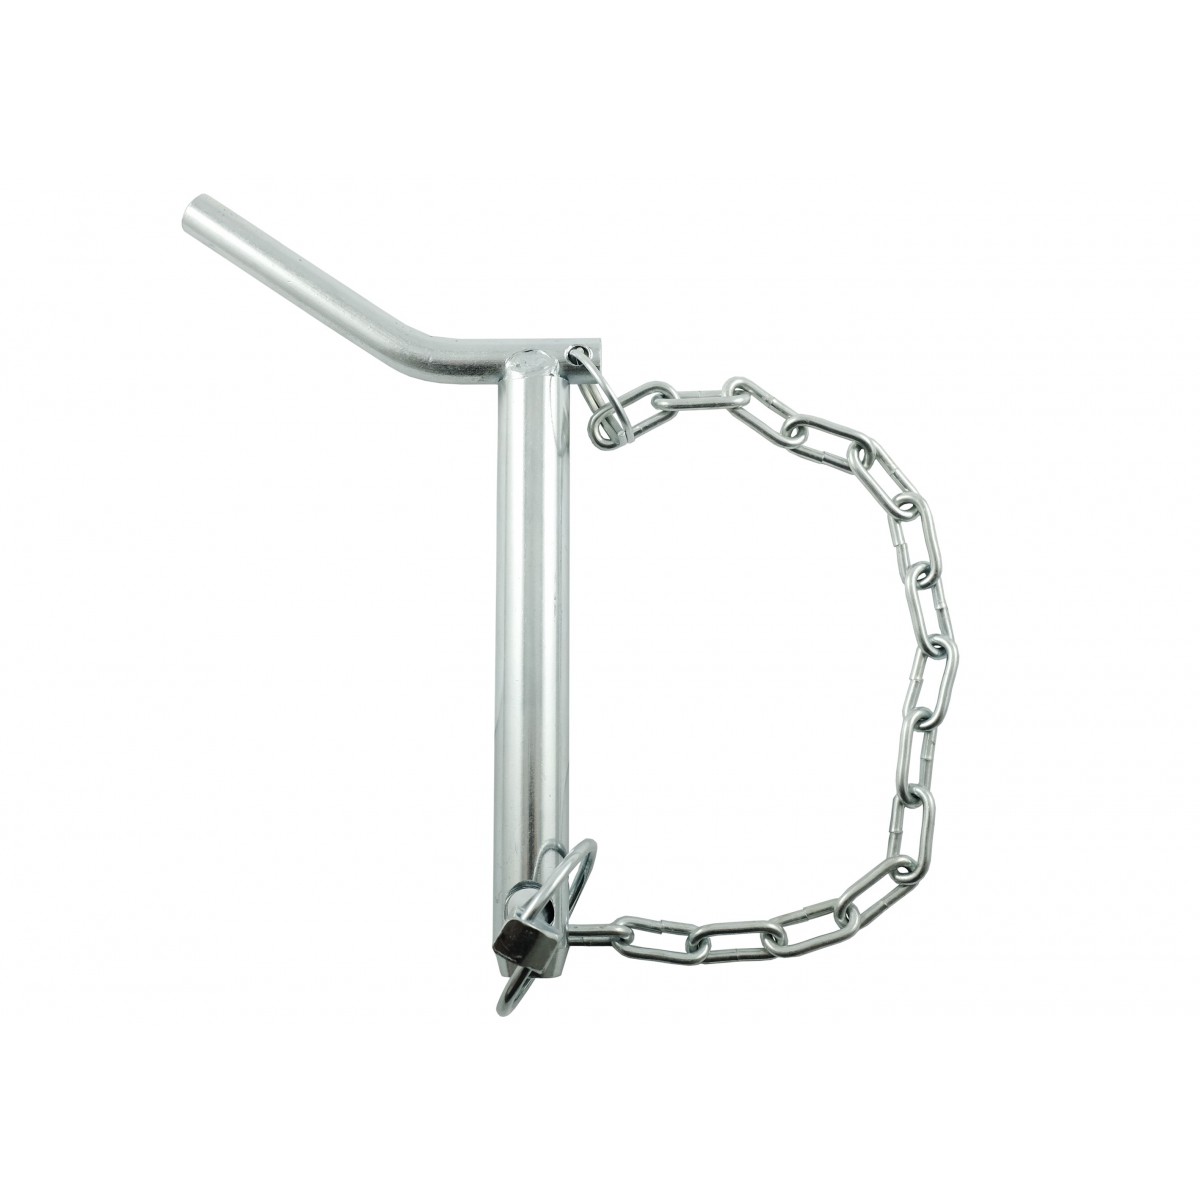 Three-point hitch pin 19x160 mm with chain and cotter pin